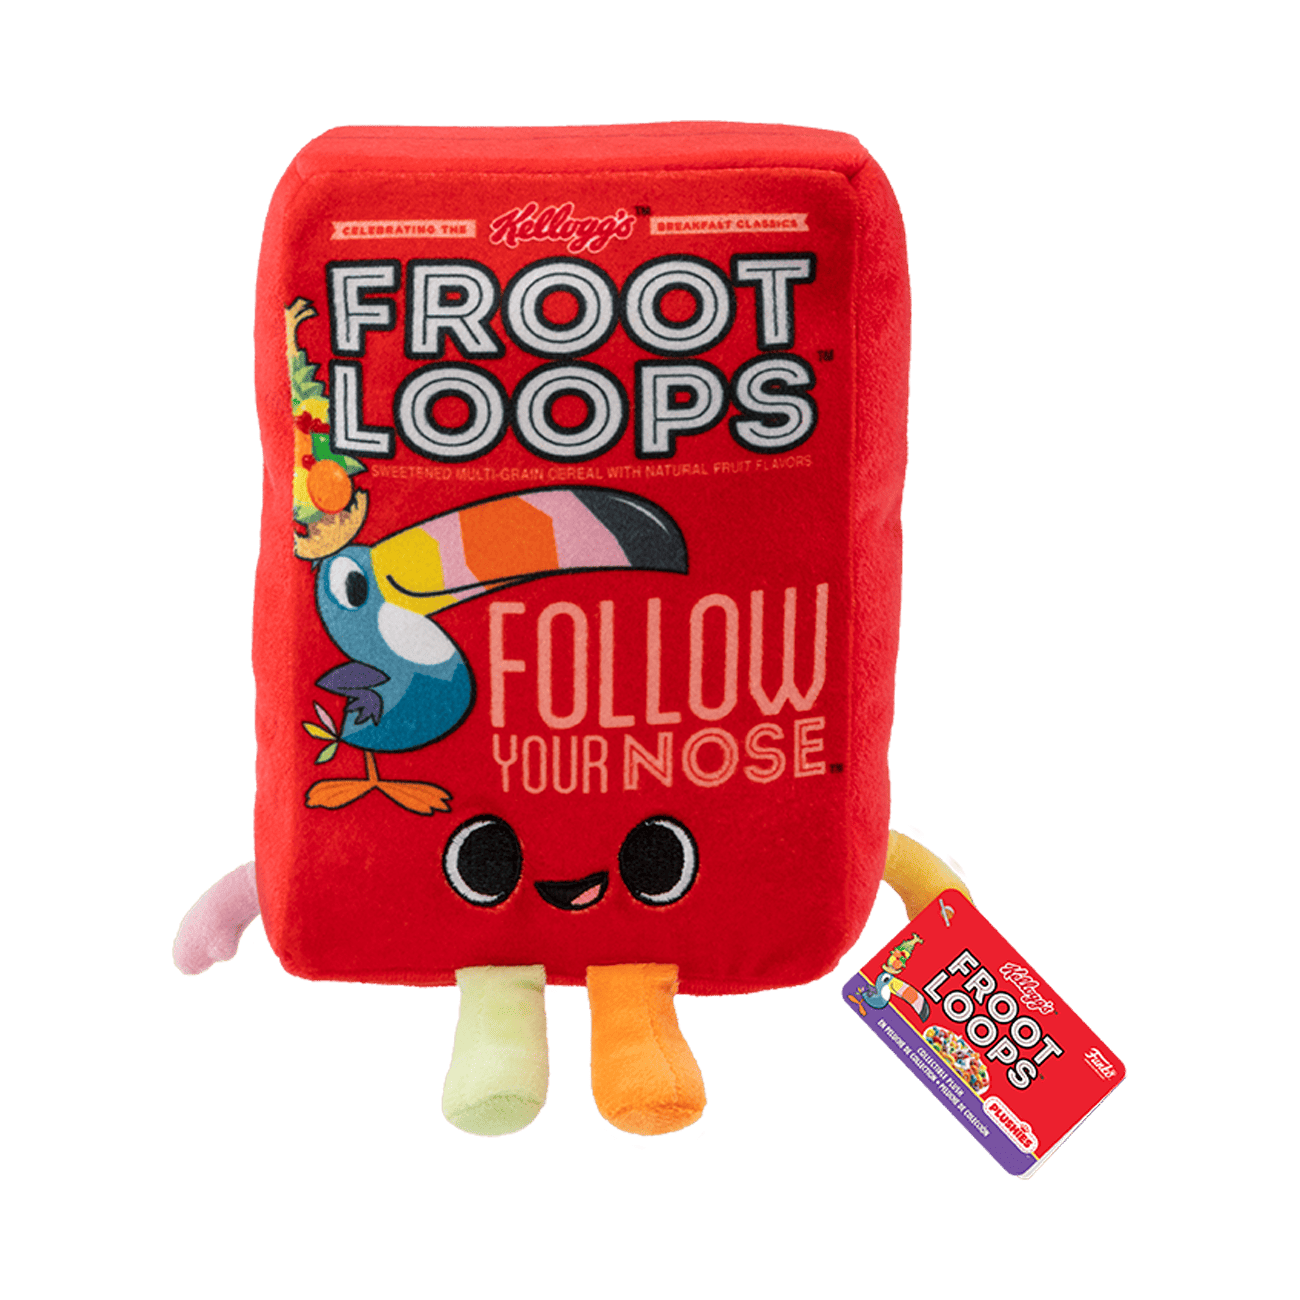 froot loops cereal box